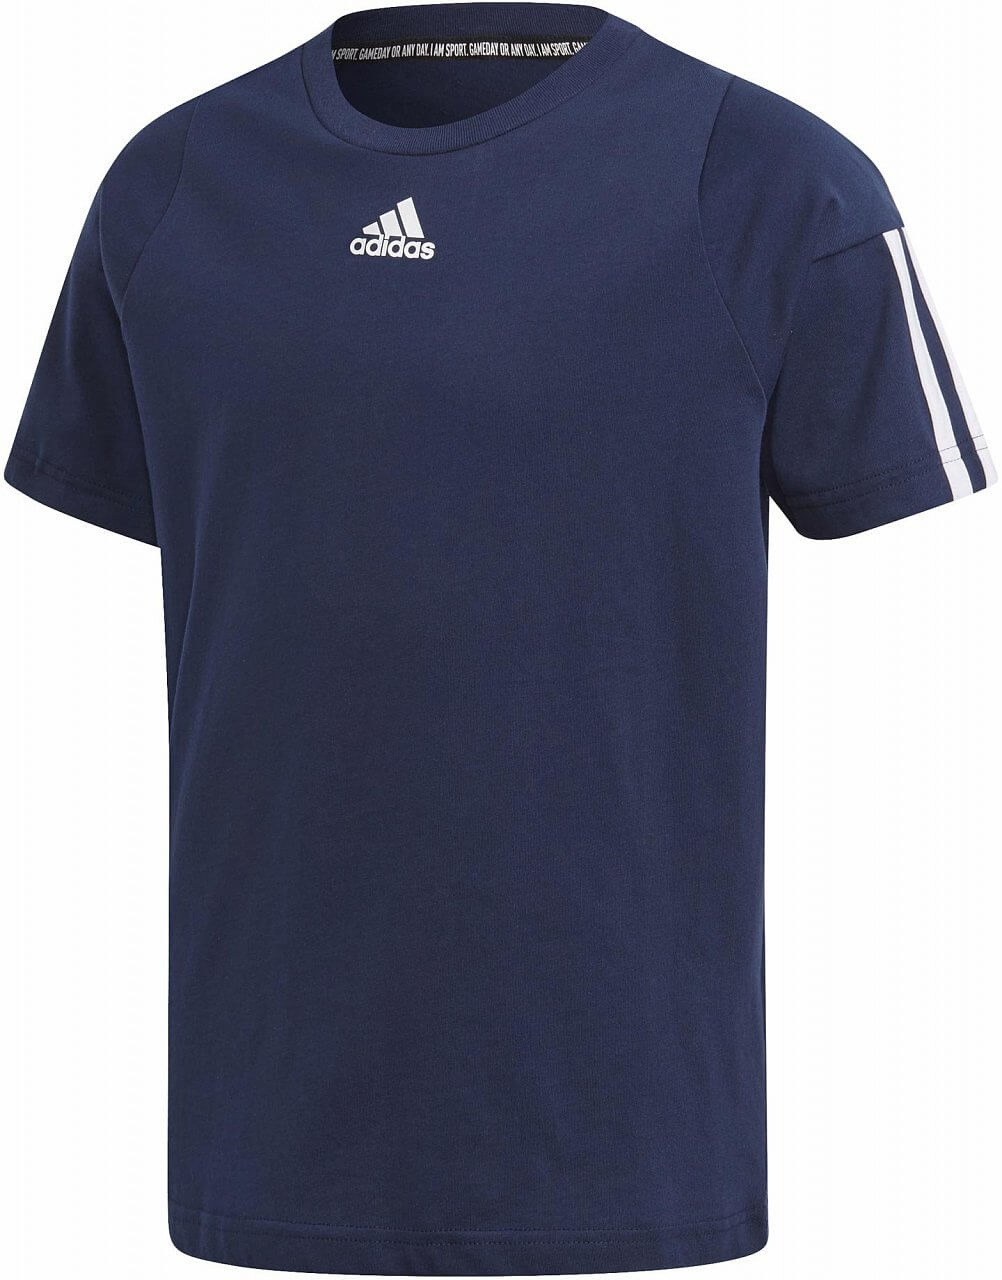 T-Shirts adidas Youth Boys Must Haves 3S Tee